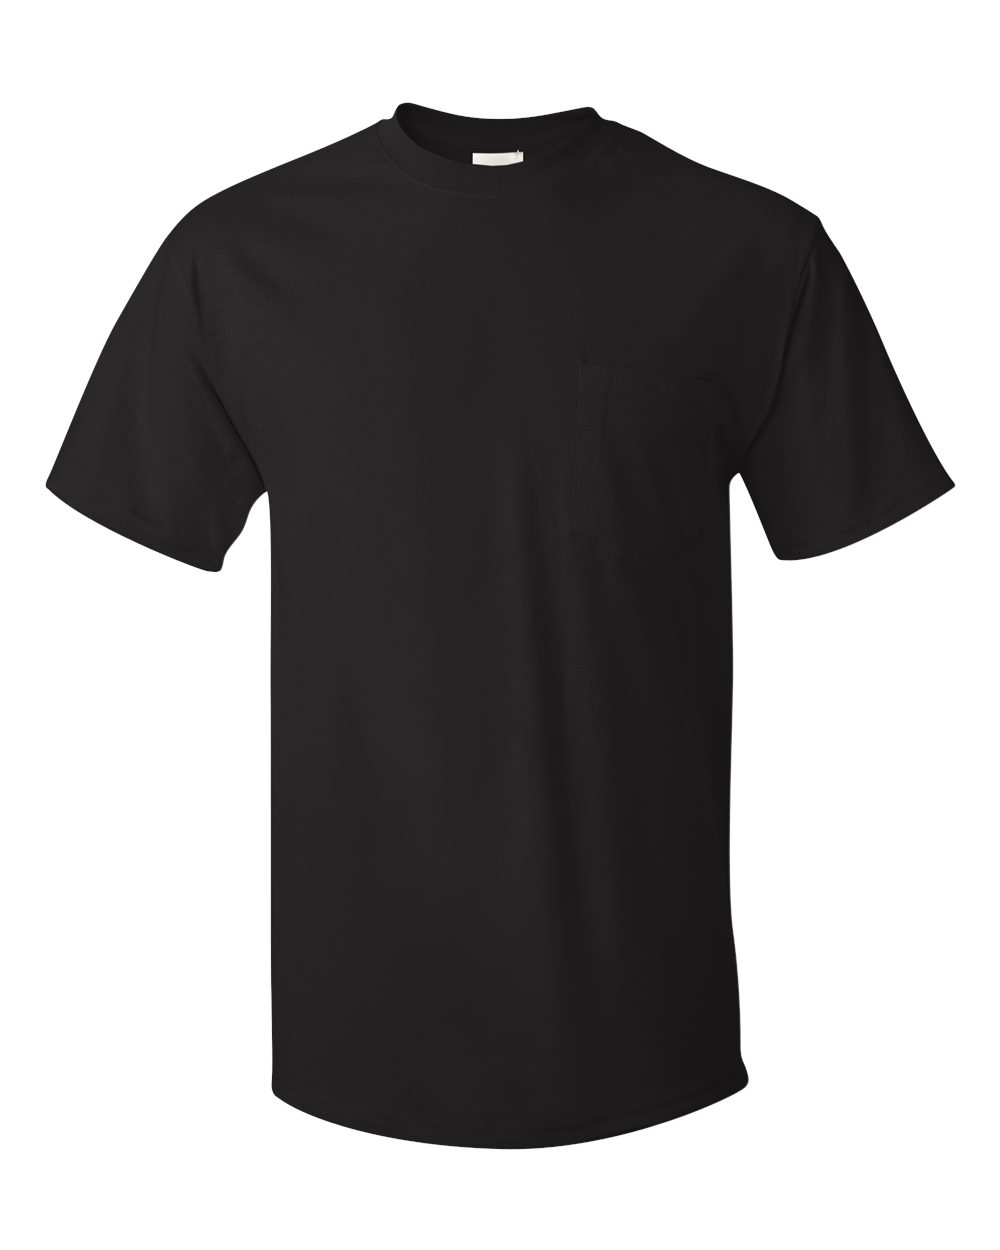 Hanes Mens Blank Short Sleeve Work T Shirt with a Pocket 5590 up to 3XL ...